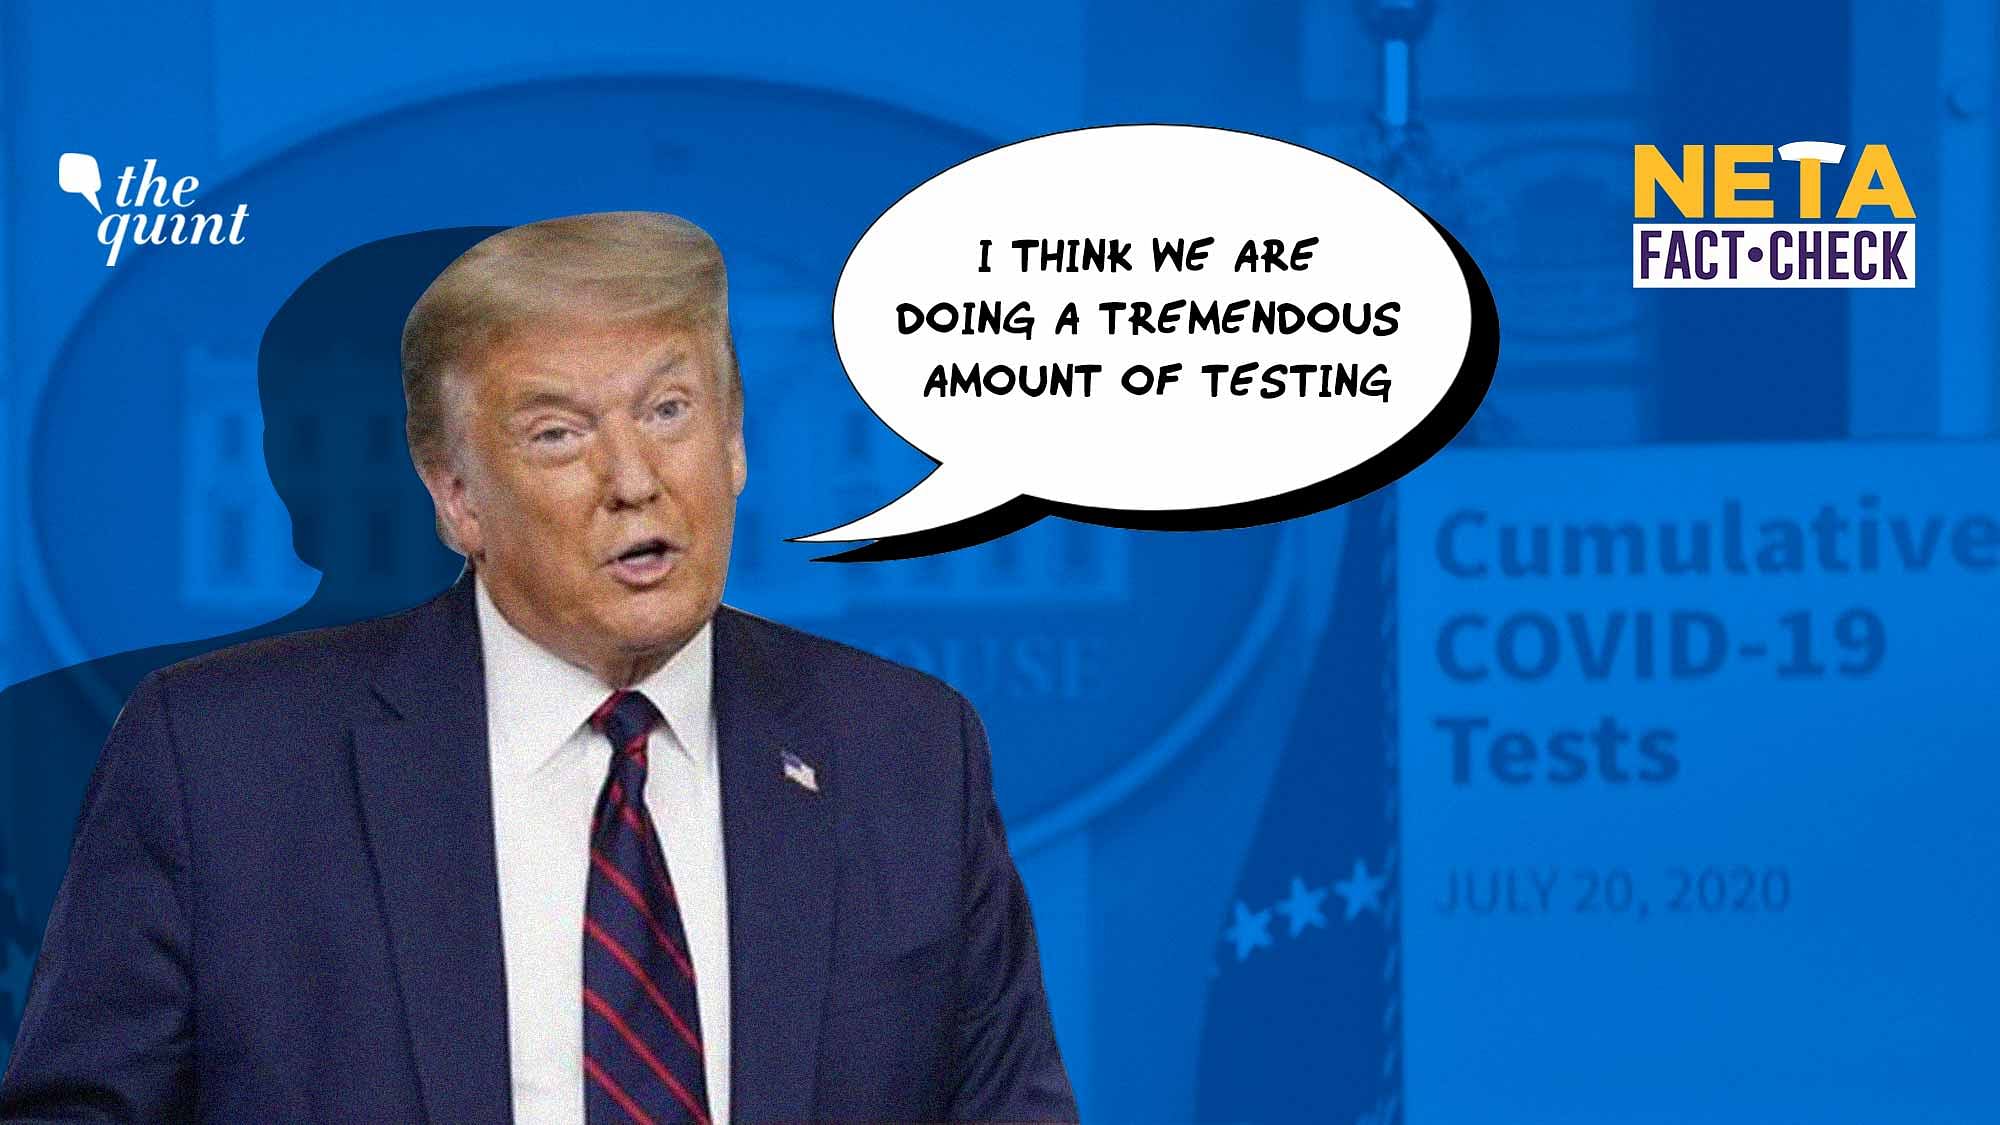 Trump’s COVID-10 testing numbers don’t provide the full story.